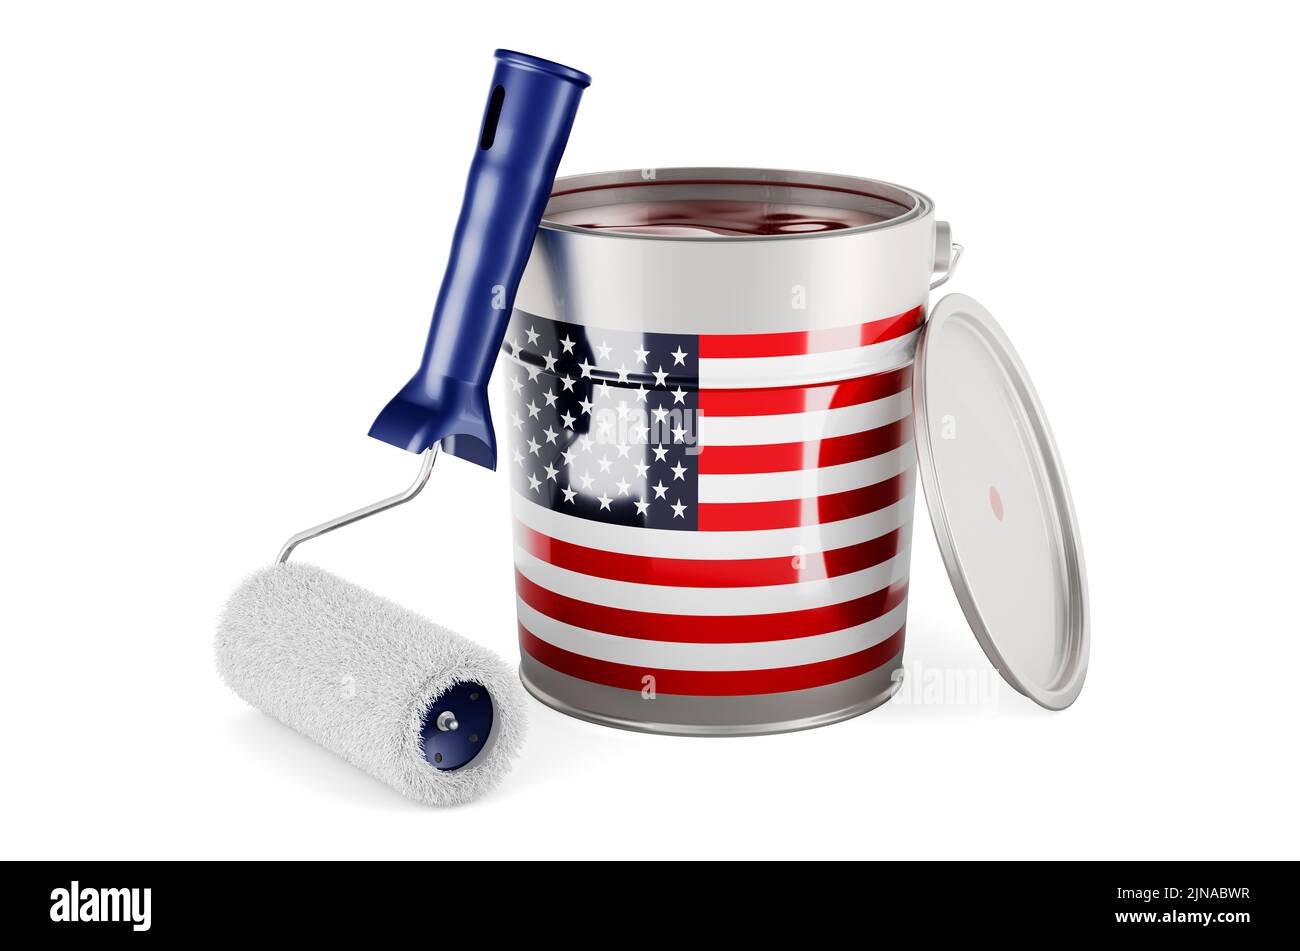 The United States flag on the paint can, 3D rendering isolated on white background Stock Photo